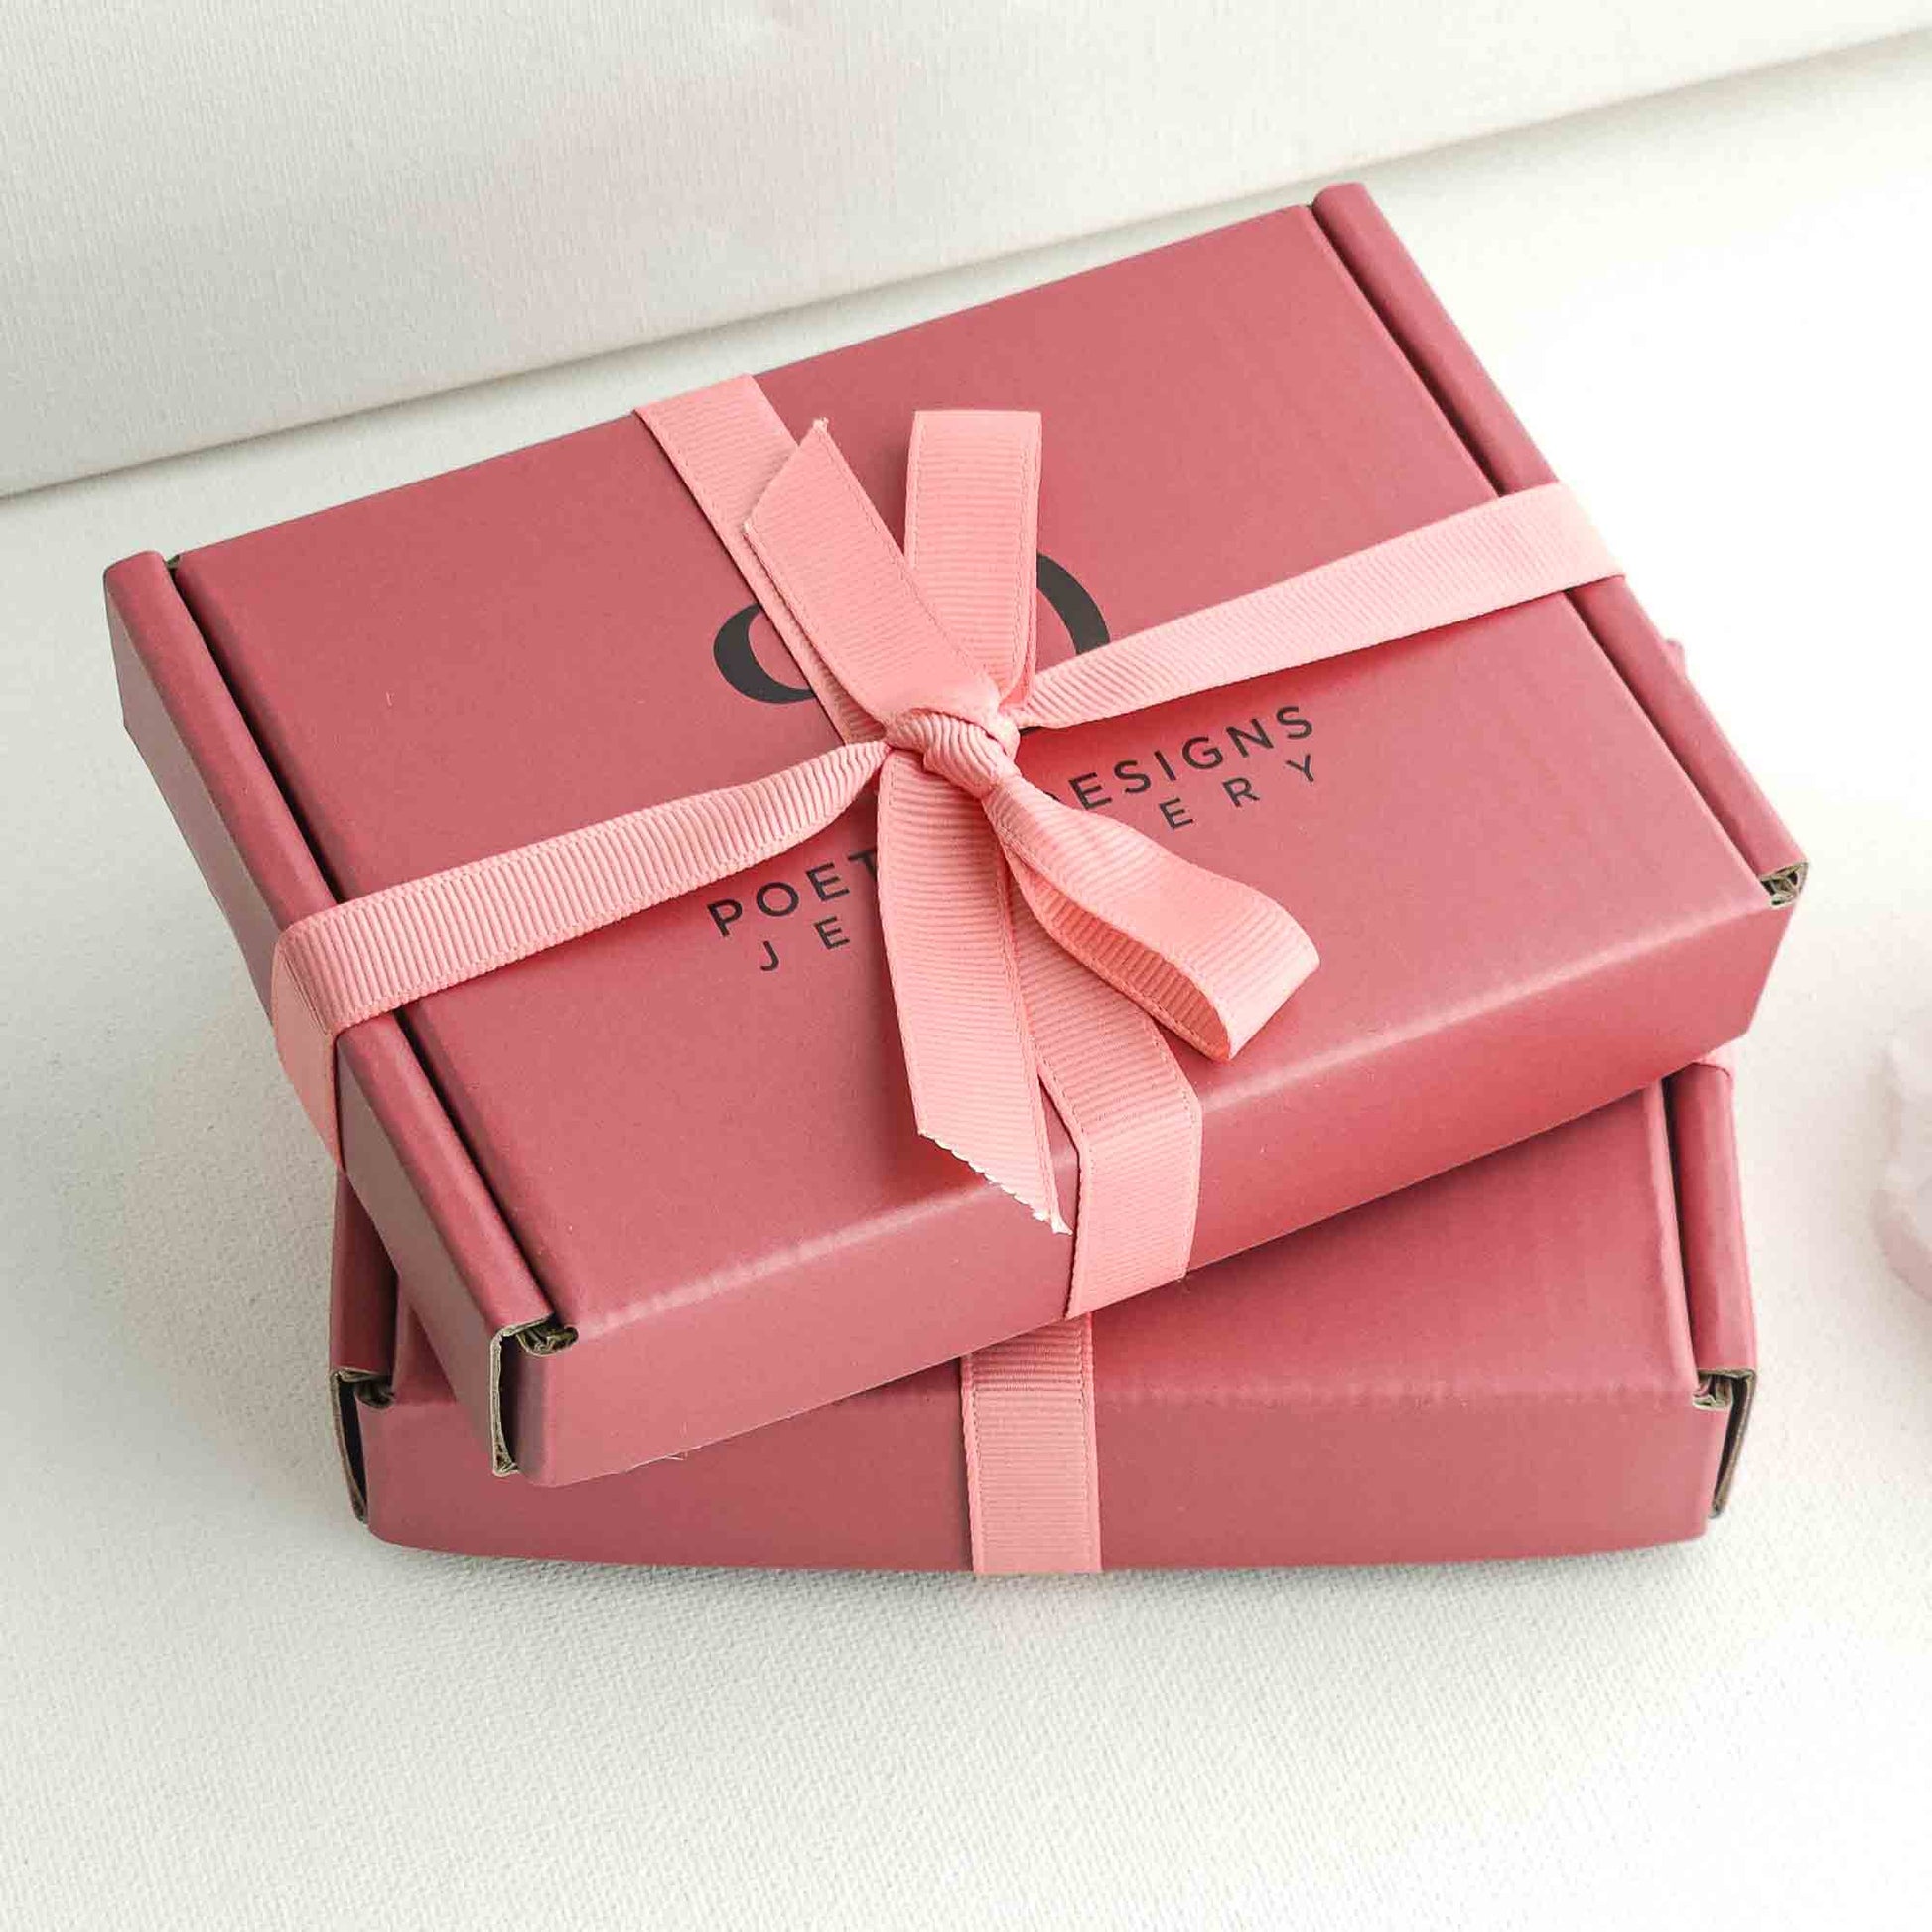 Poetry Designs gift ready packaging